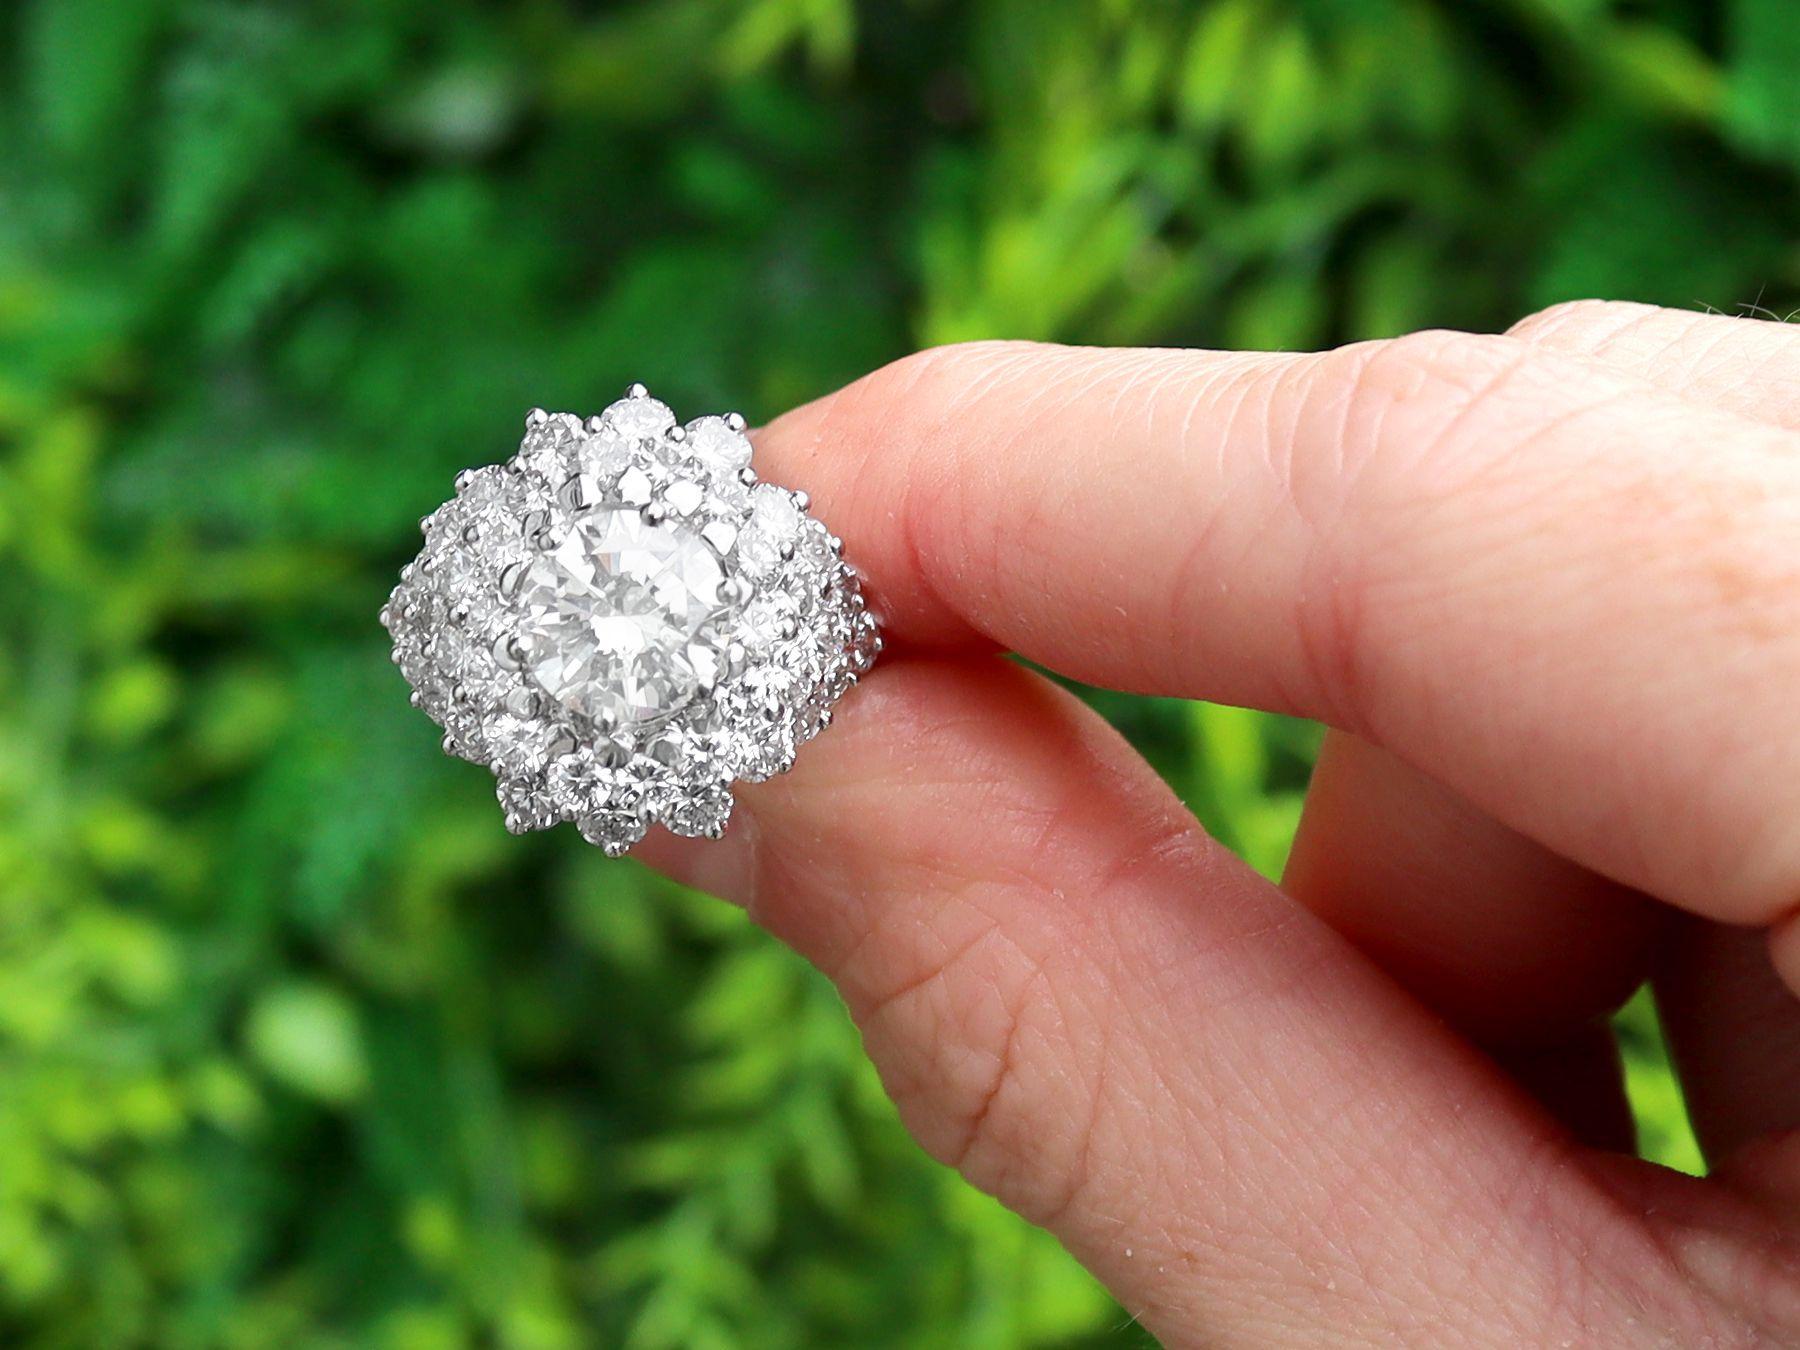 A stunning, fine and impressive vintage French 5.19 carat diamond and 18 karat white gold cluster ring; part of our diverse diamond jewellery and estate jewelry collections.

This stunning, fine and impressive diamond cluster ring has been crafted